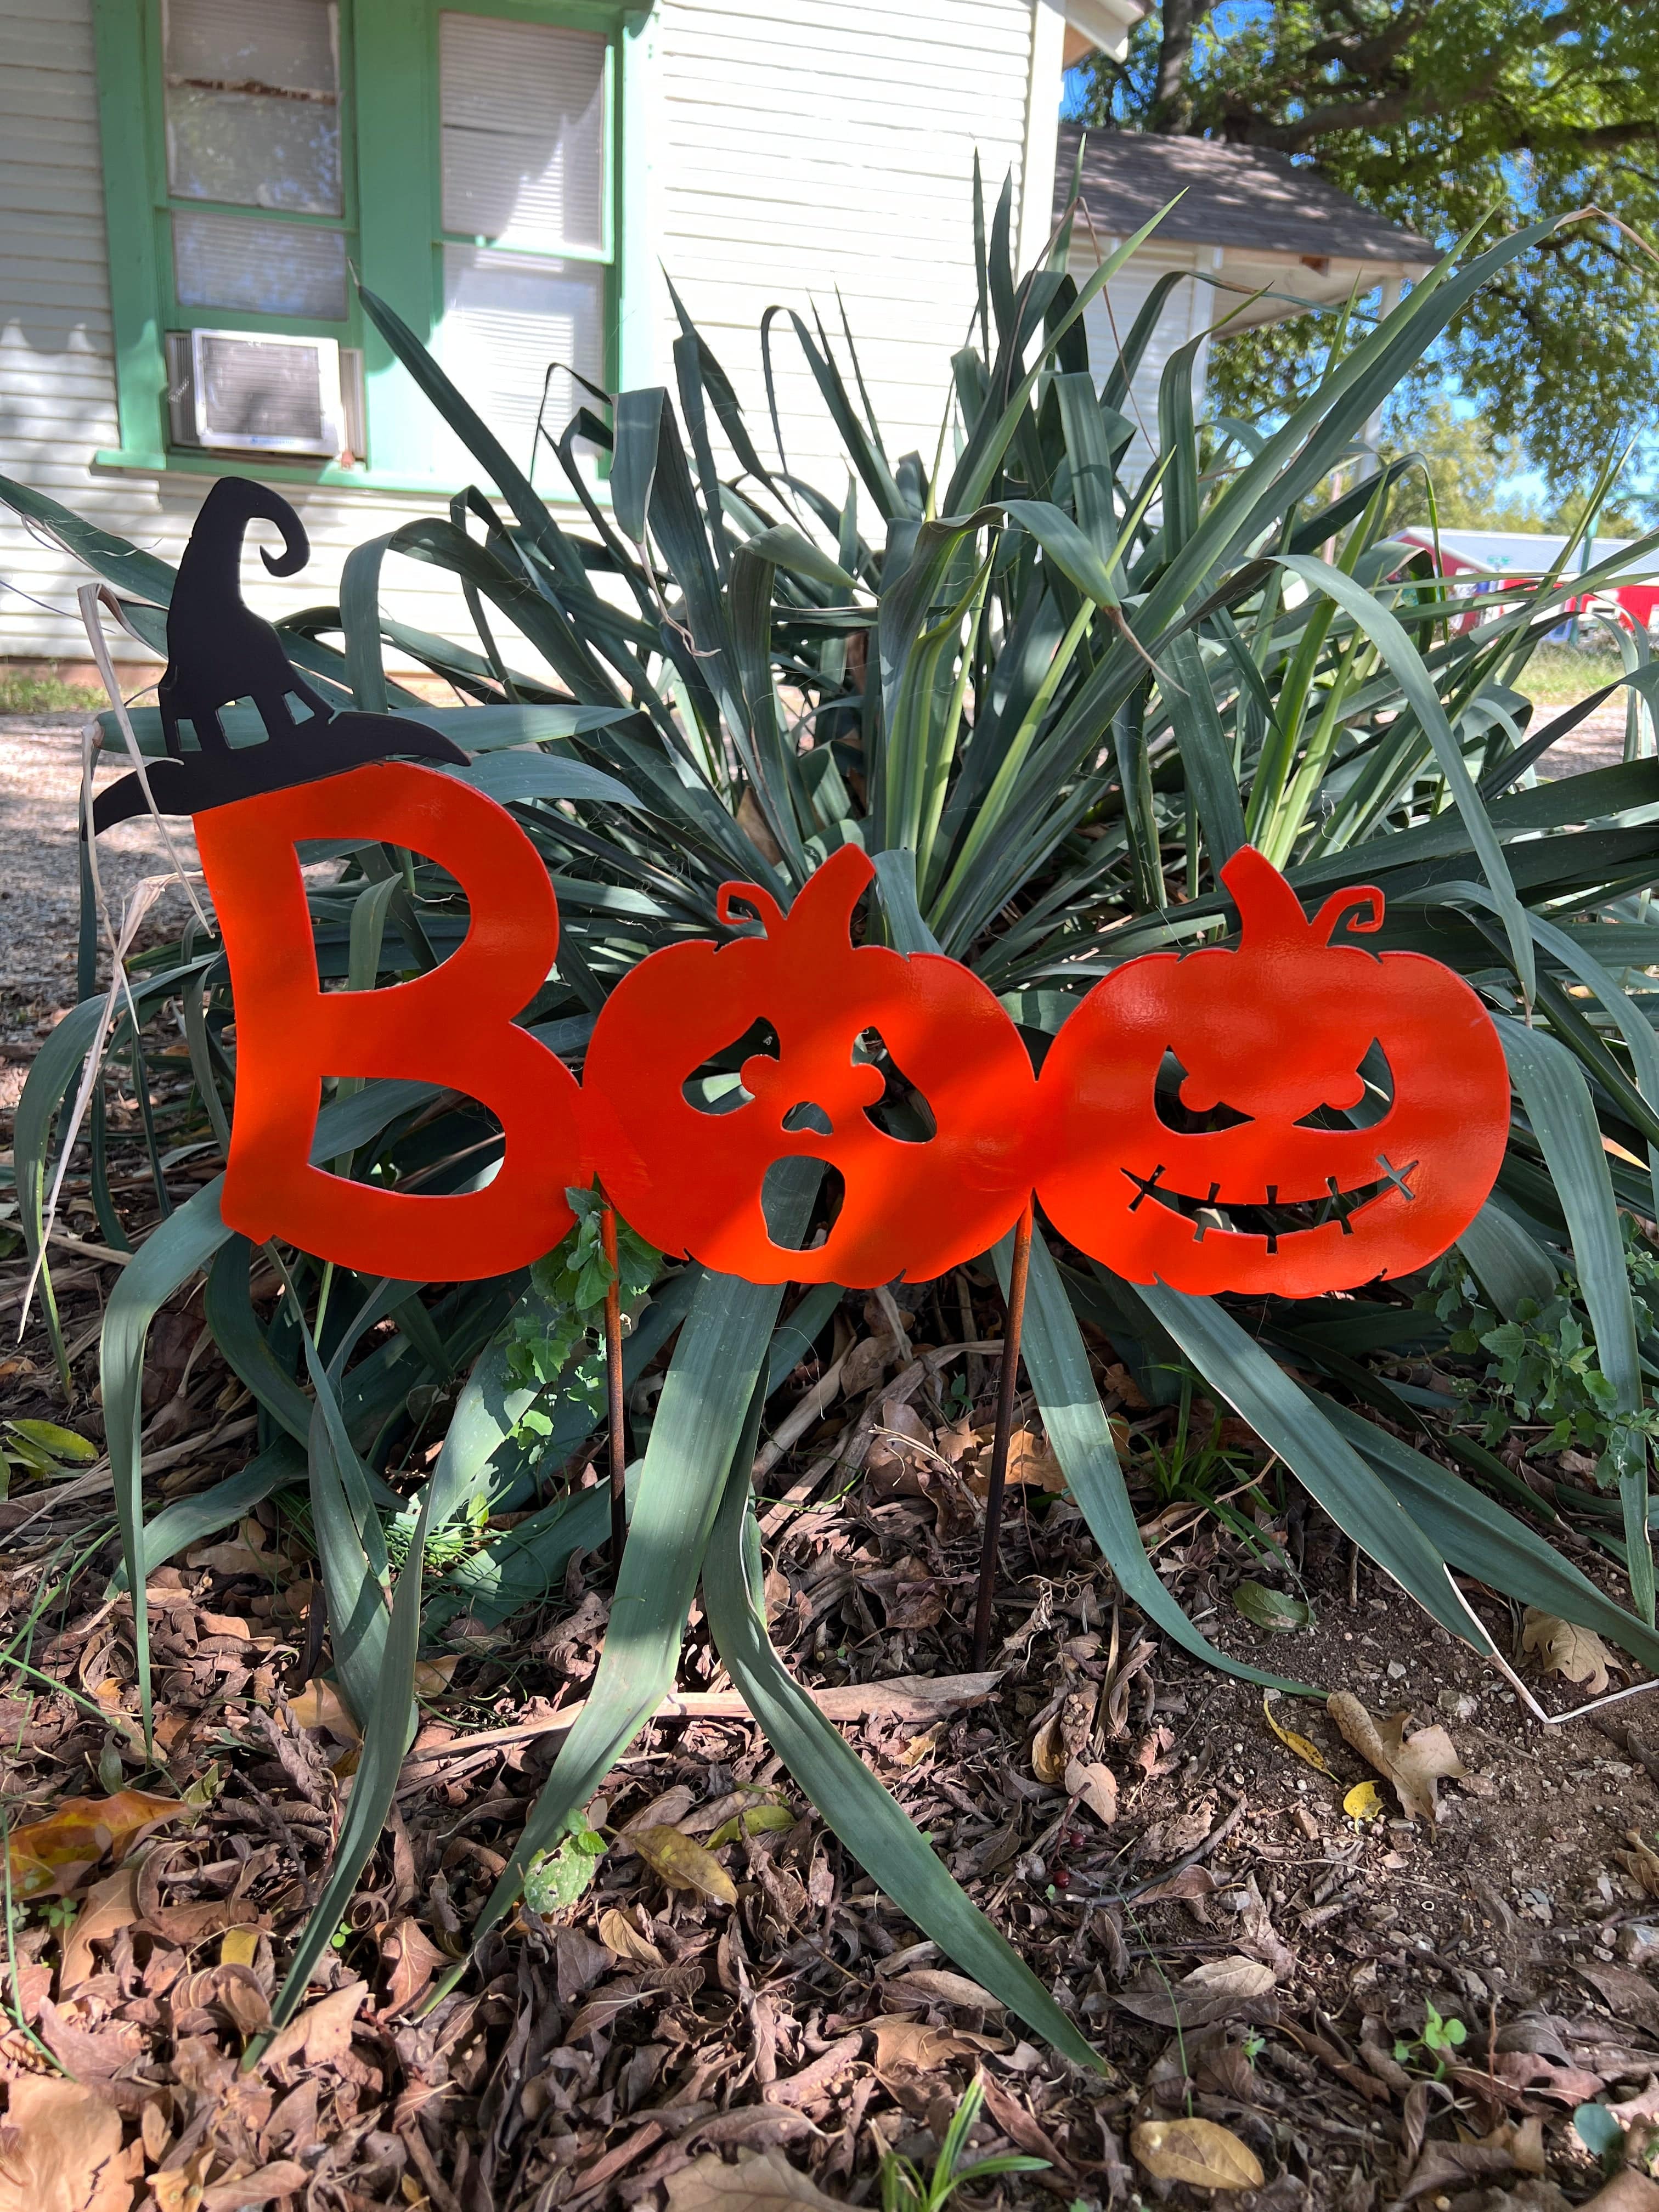 Rusty Rooster Fabrication & Design Physical product cute Boo pumkins garden stakes